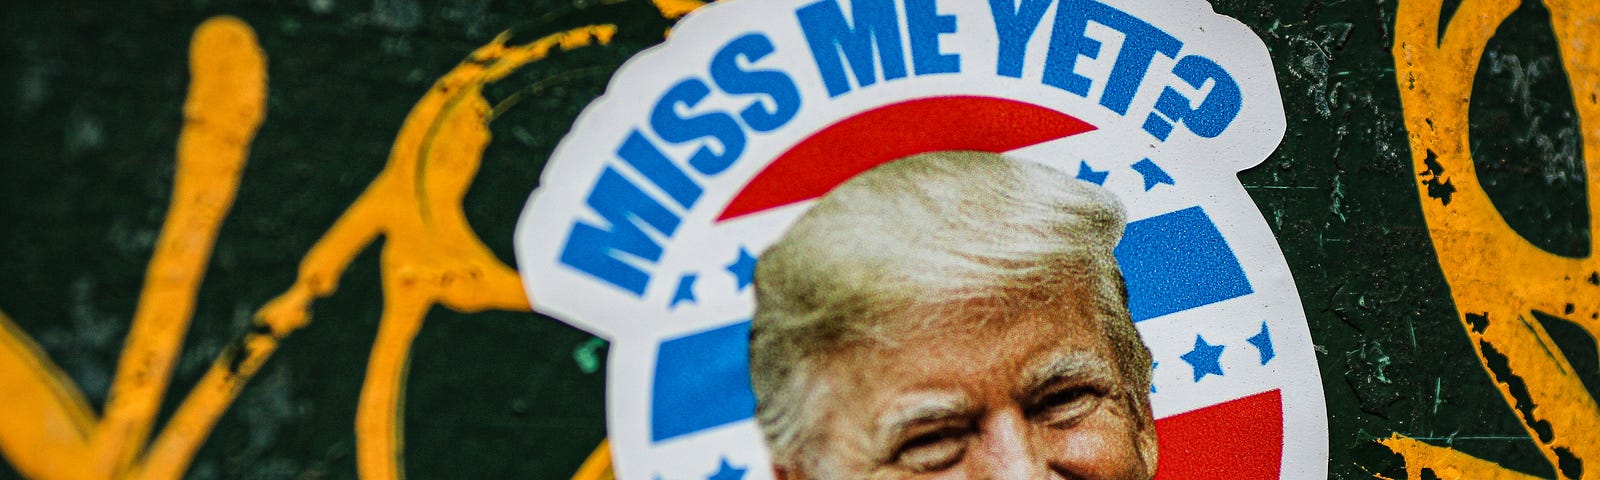 MISS ME YET? Red, White and Blue sticker with Donald Trump’s Face